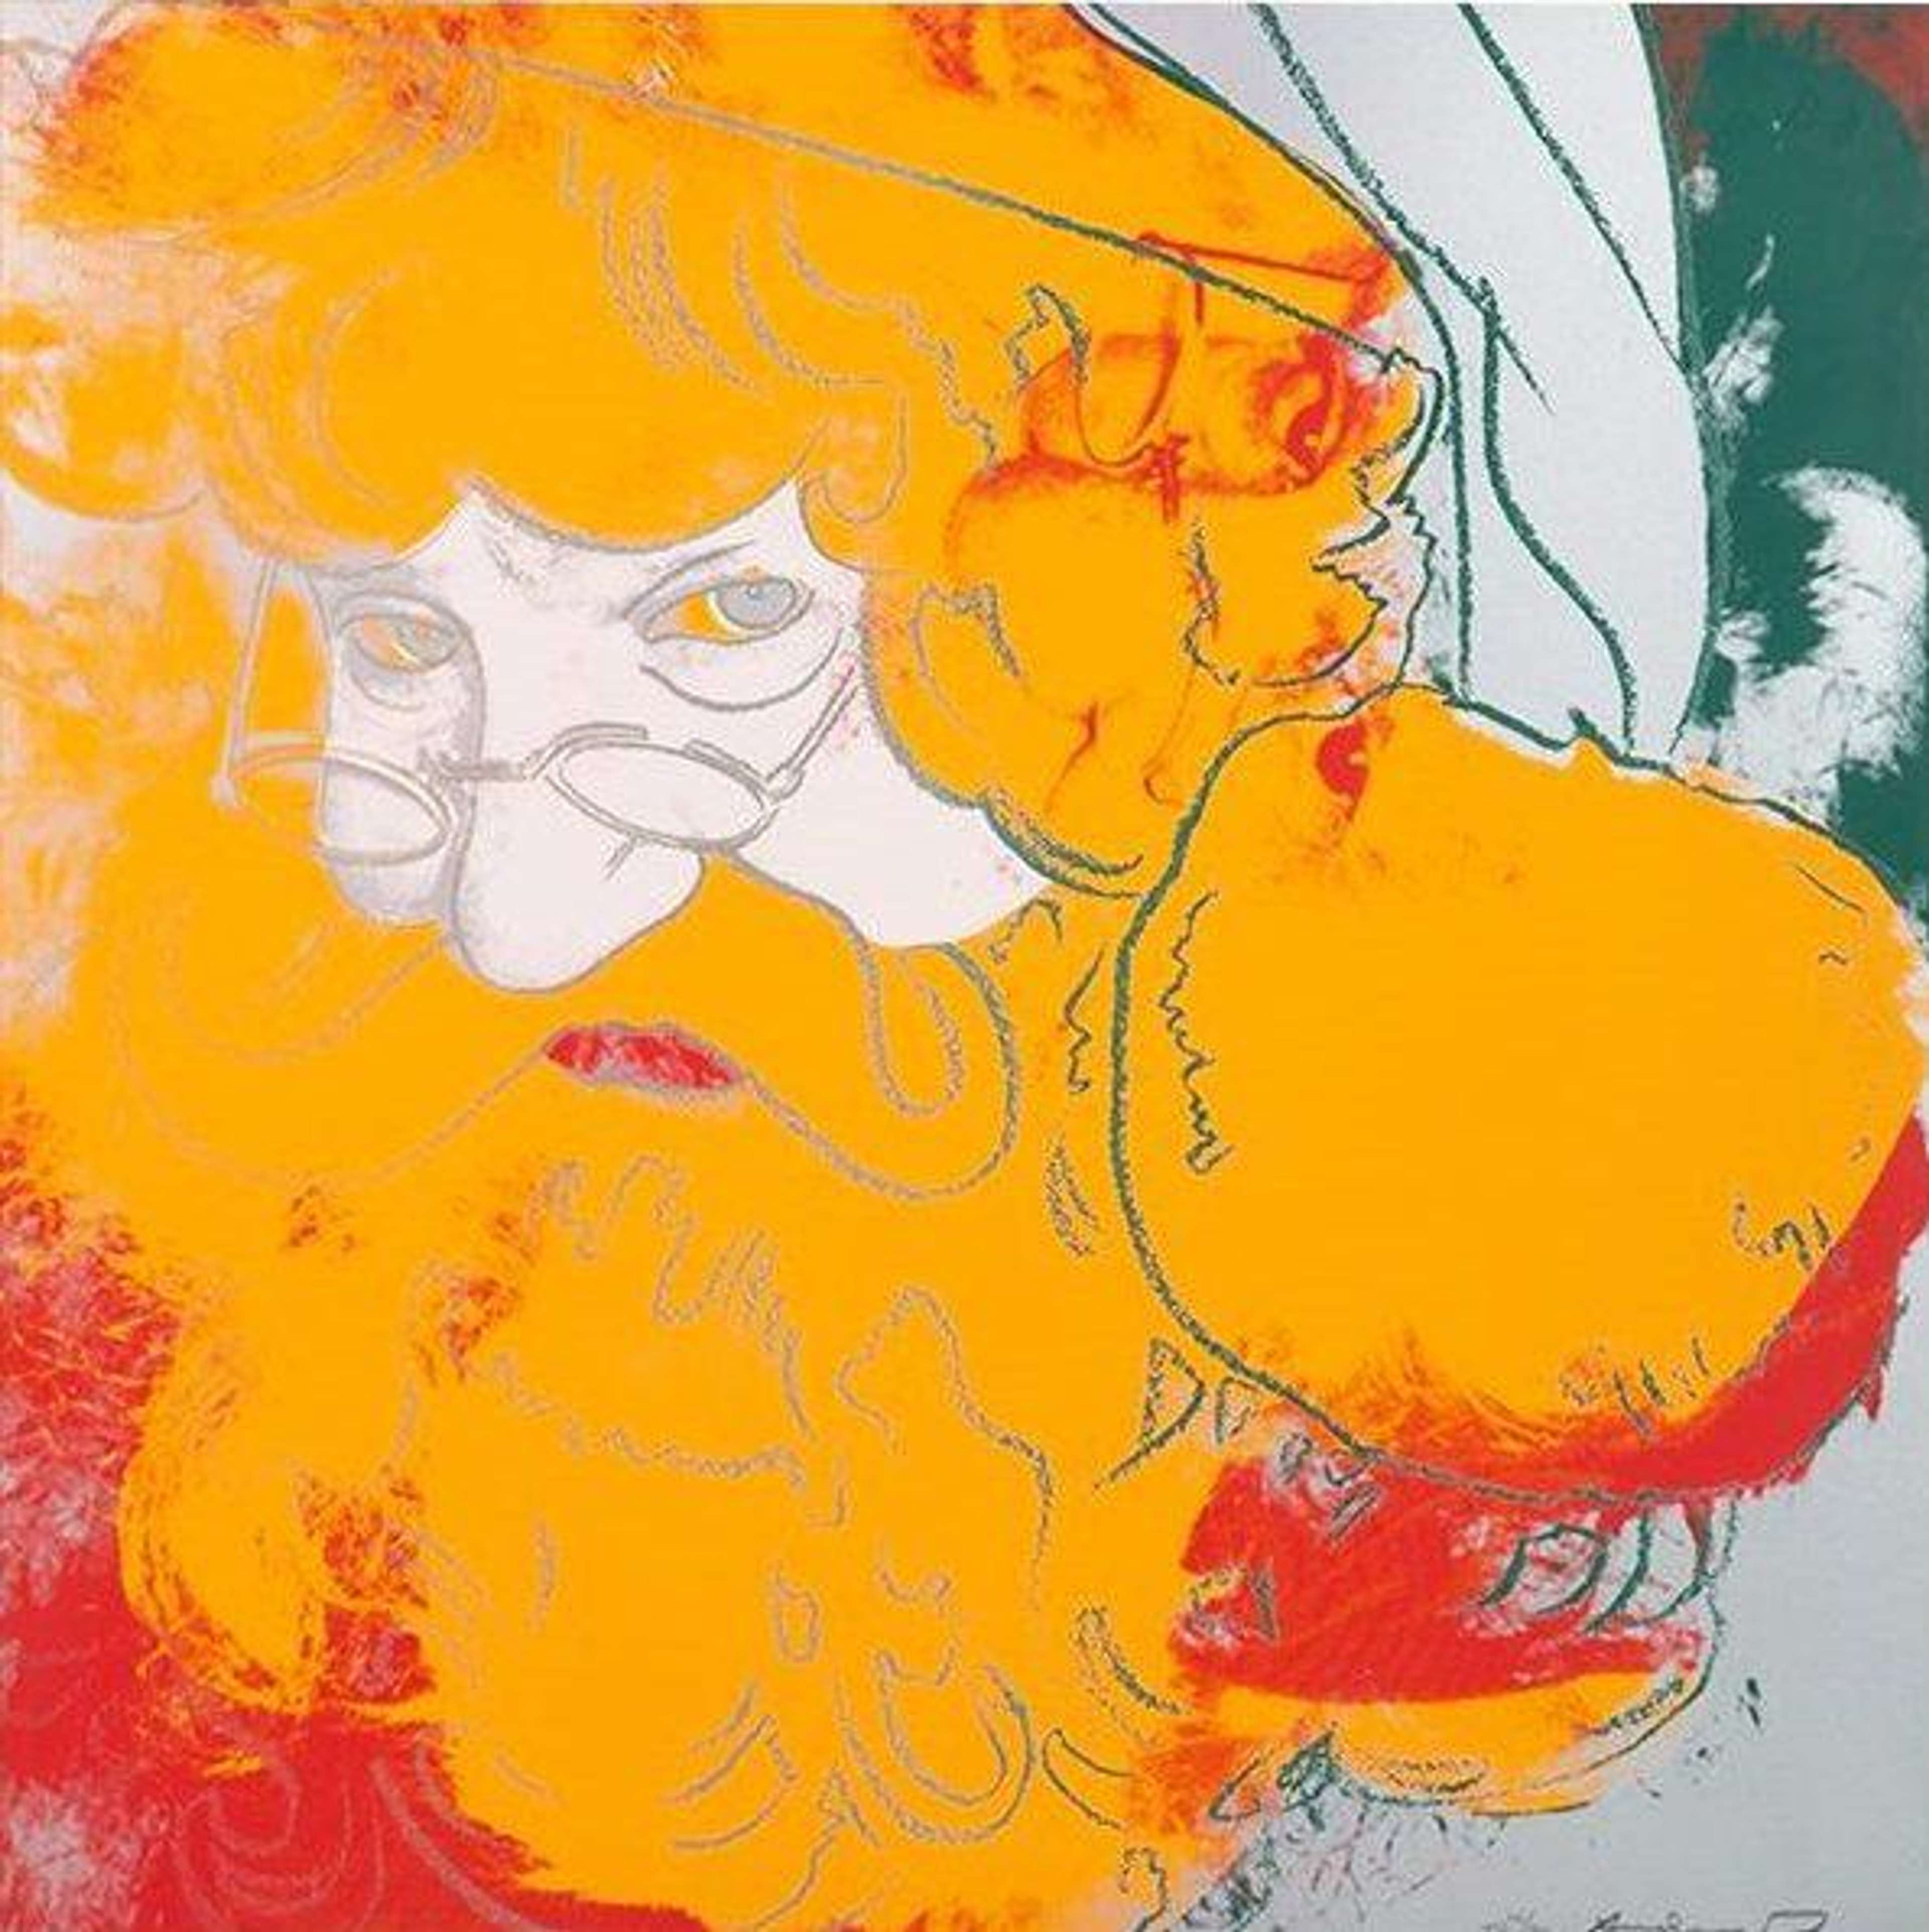 In this print Santa Claus wearing his traditional red bobble hat which matches his fluffy white beard. White dominates the composition which has a splash of red in the background. Warhol uses orange crayon-like lines to add detail to the print and delineate the character’s facial features, such as his warm eyes and knowing smile.